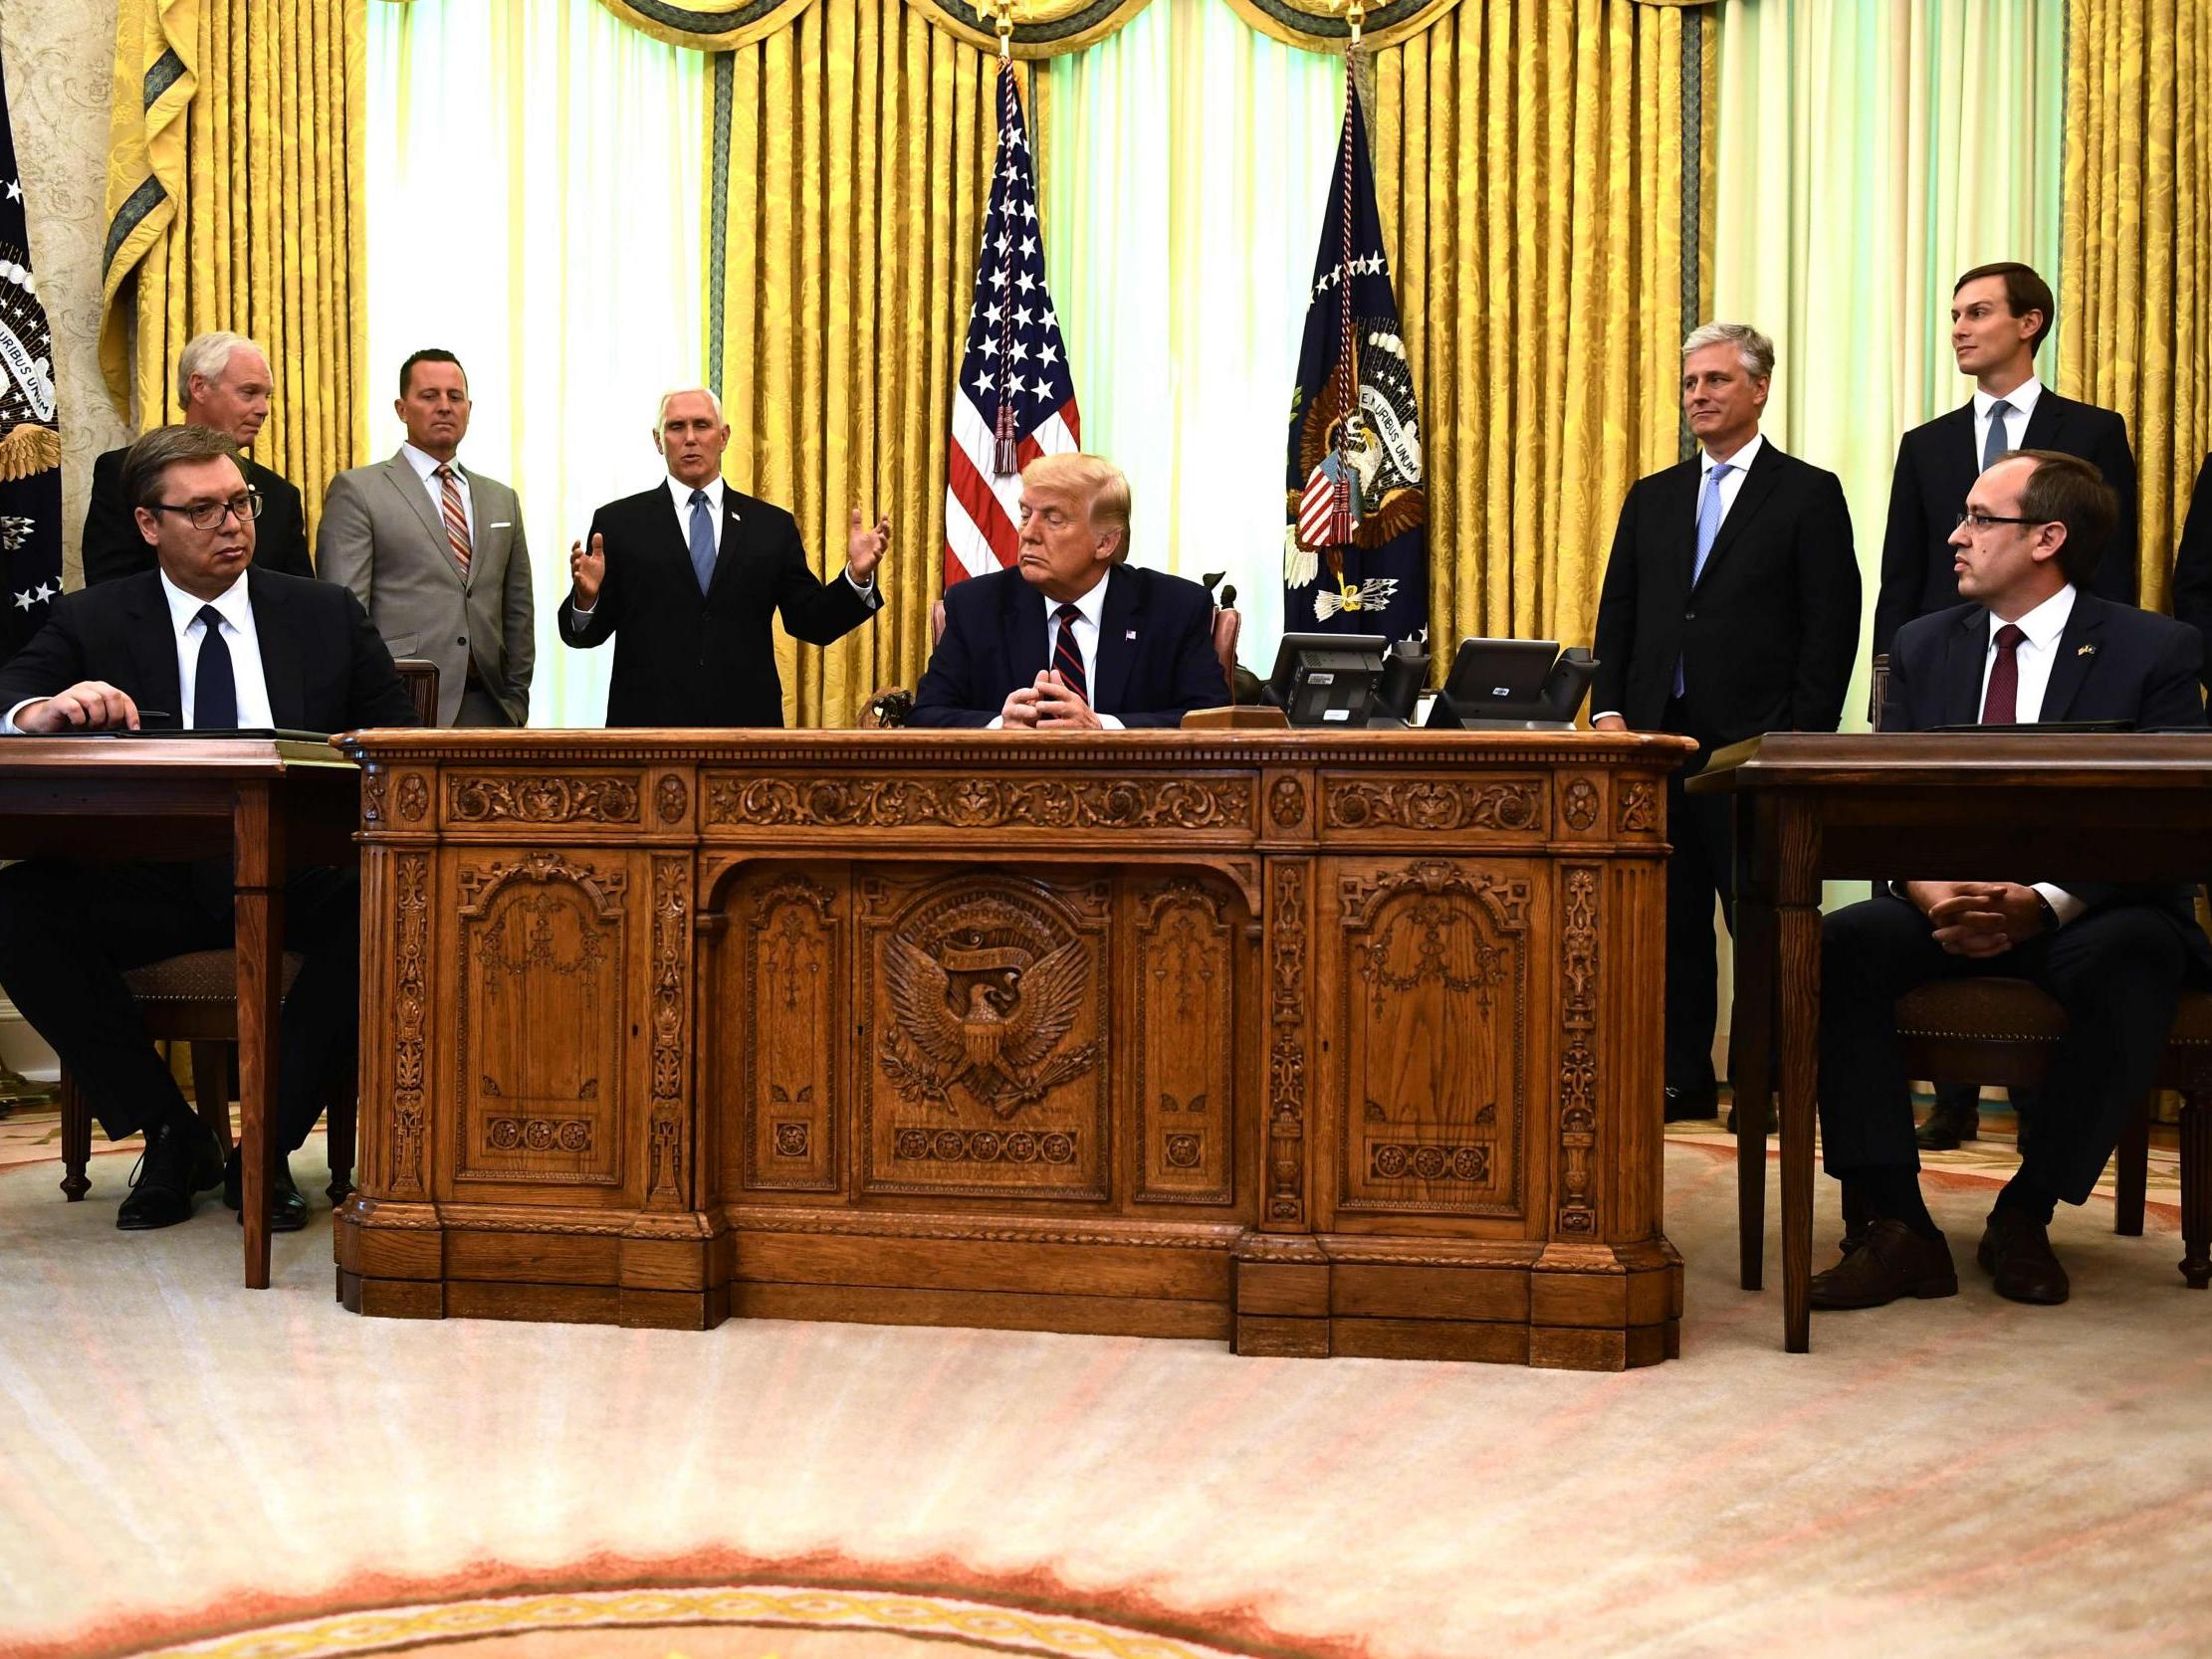 US President Donald Trump (C), Kosovar Prime Minister Avdullah Hoti (R) and Serbian President Aleksandar Vucic (L) attend a signing ceremony in the Oval Office